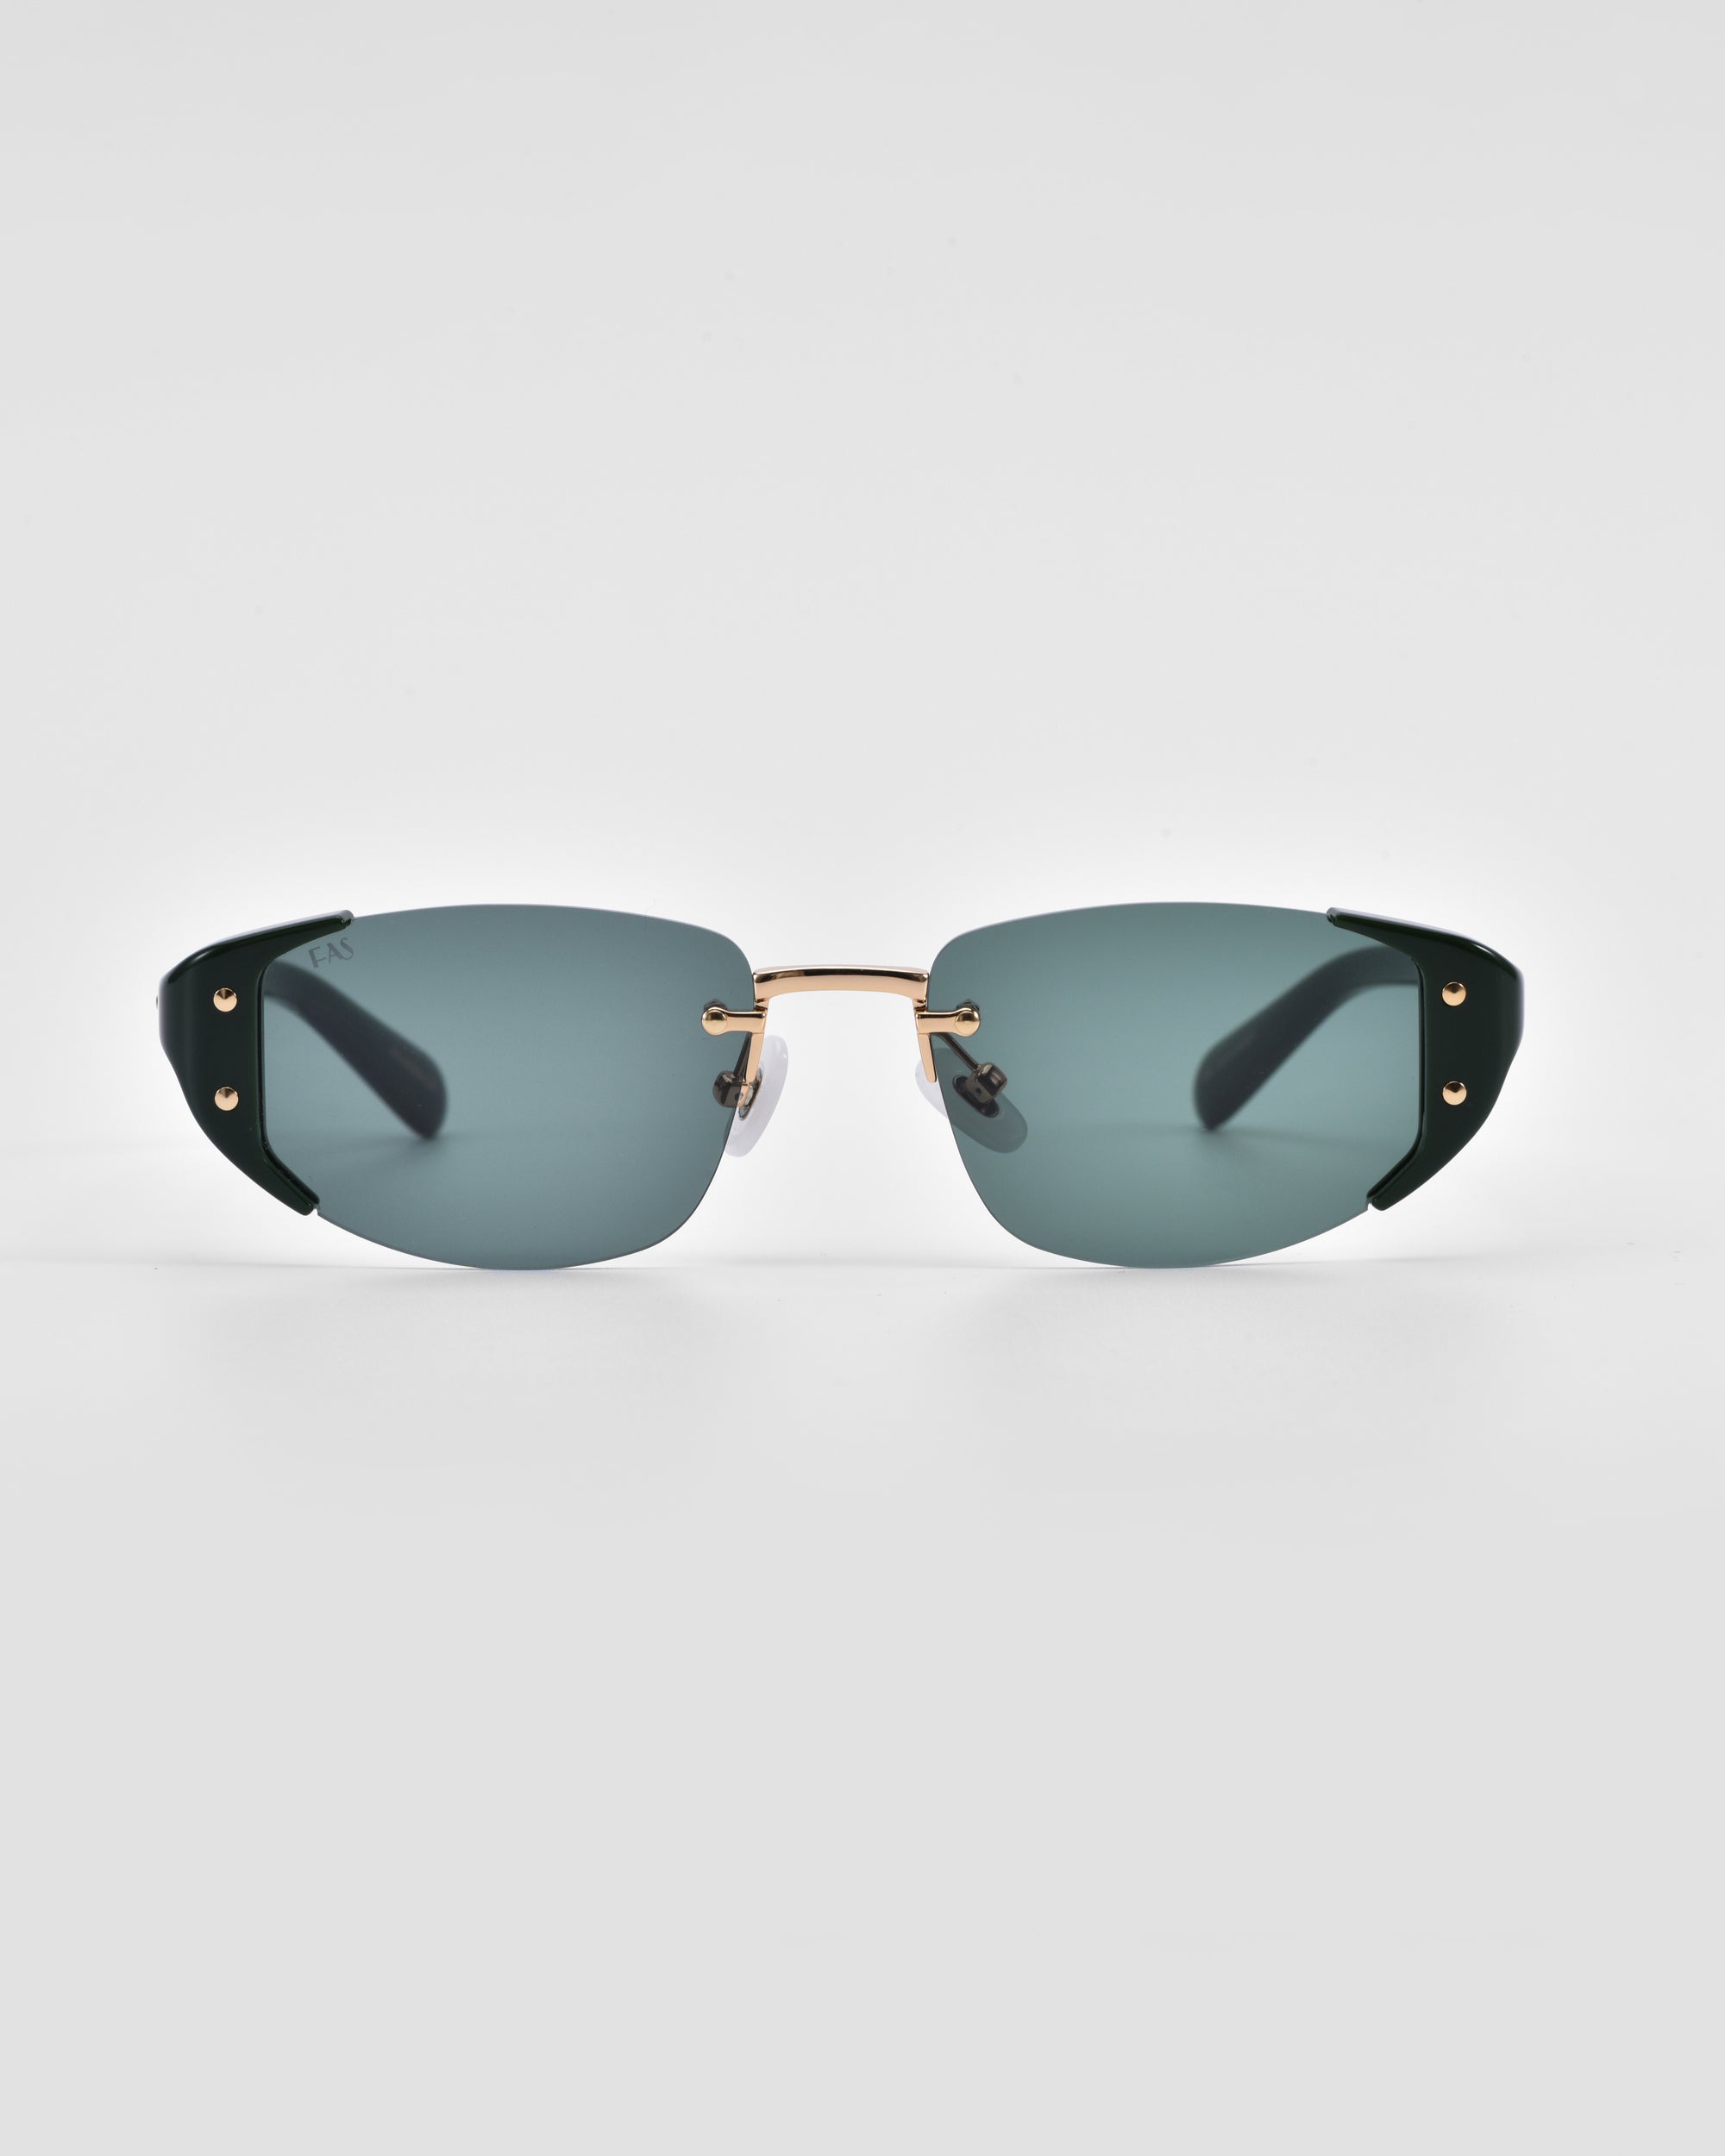 A pair of sleek, modern For Art&#39;s Sake® Harbour sunglasses with green-tinted lenses and a minimalistic design. The frames are thin and predominantly gold with black accents on the temples, complemented by jade-stone nose pads. The background is plain white, emphasizing the stylish eyewear.